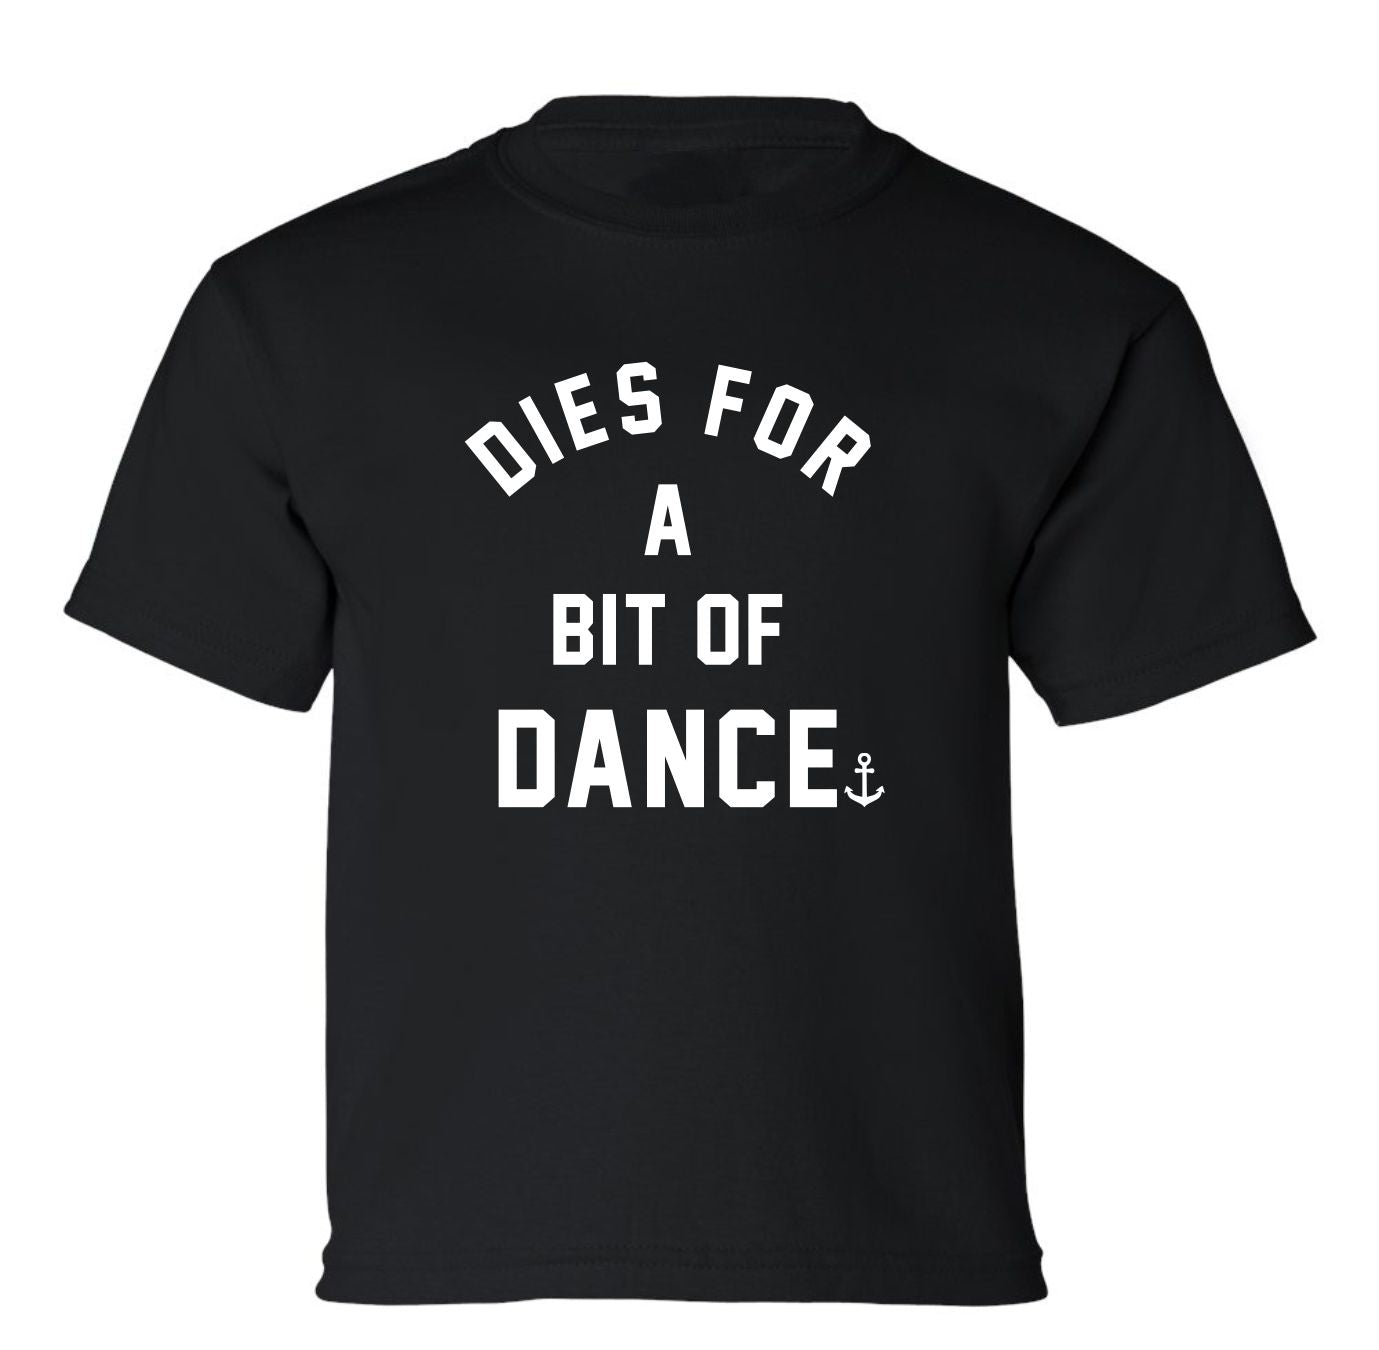 "Dies For A Bit Of Dance" Toddler/Youth T-Shirt